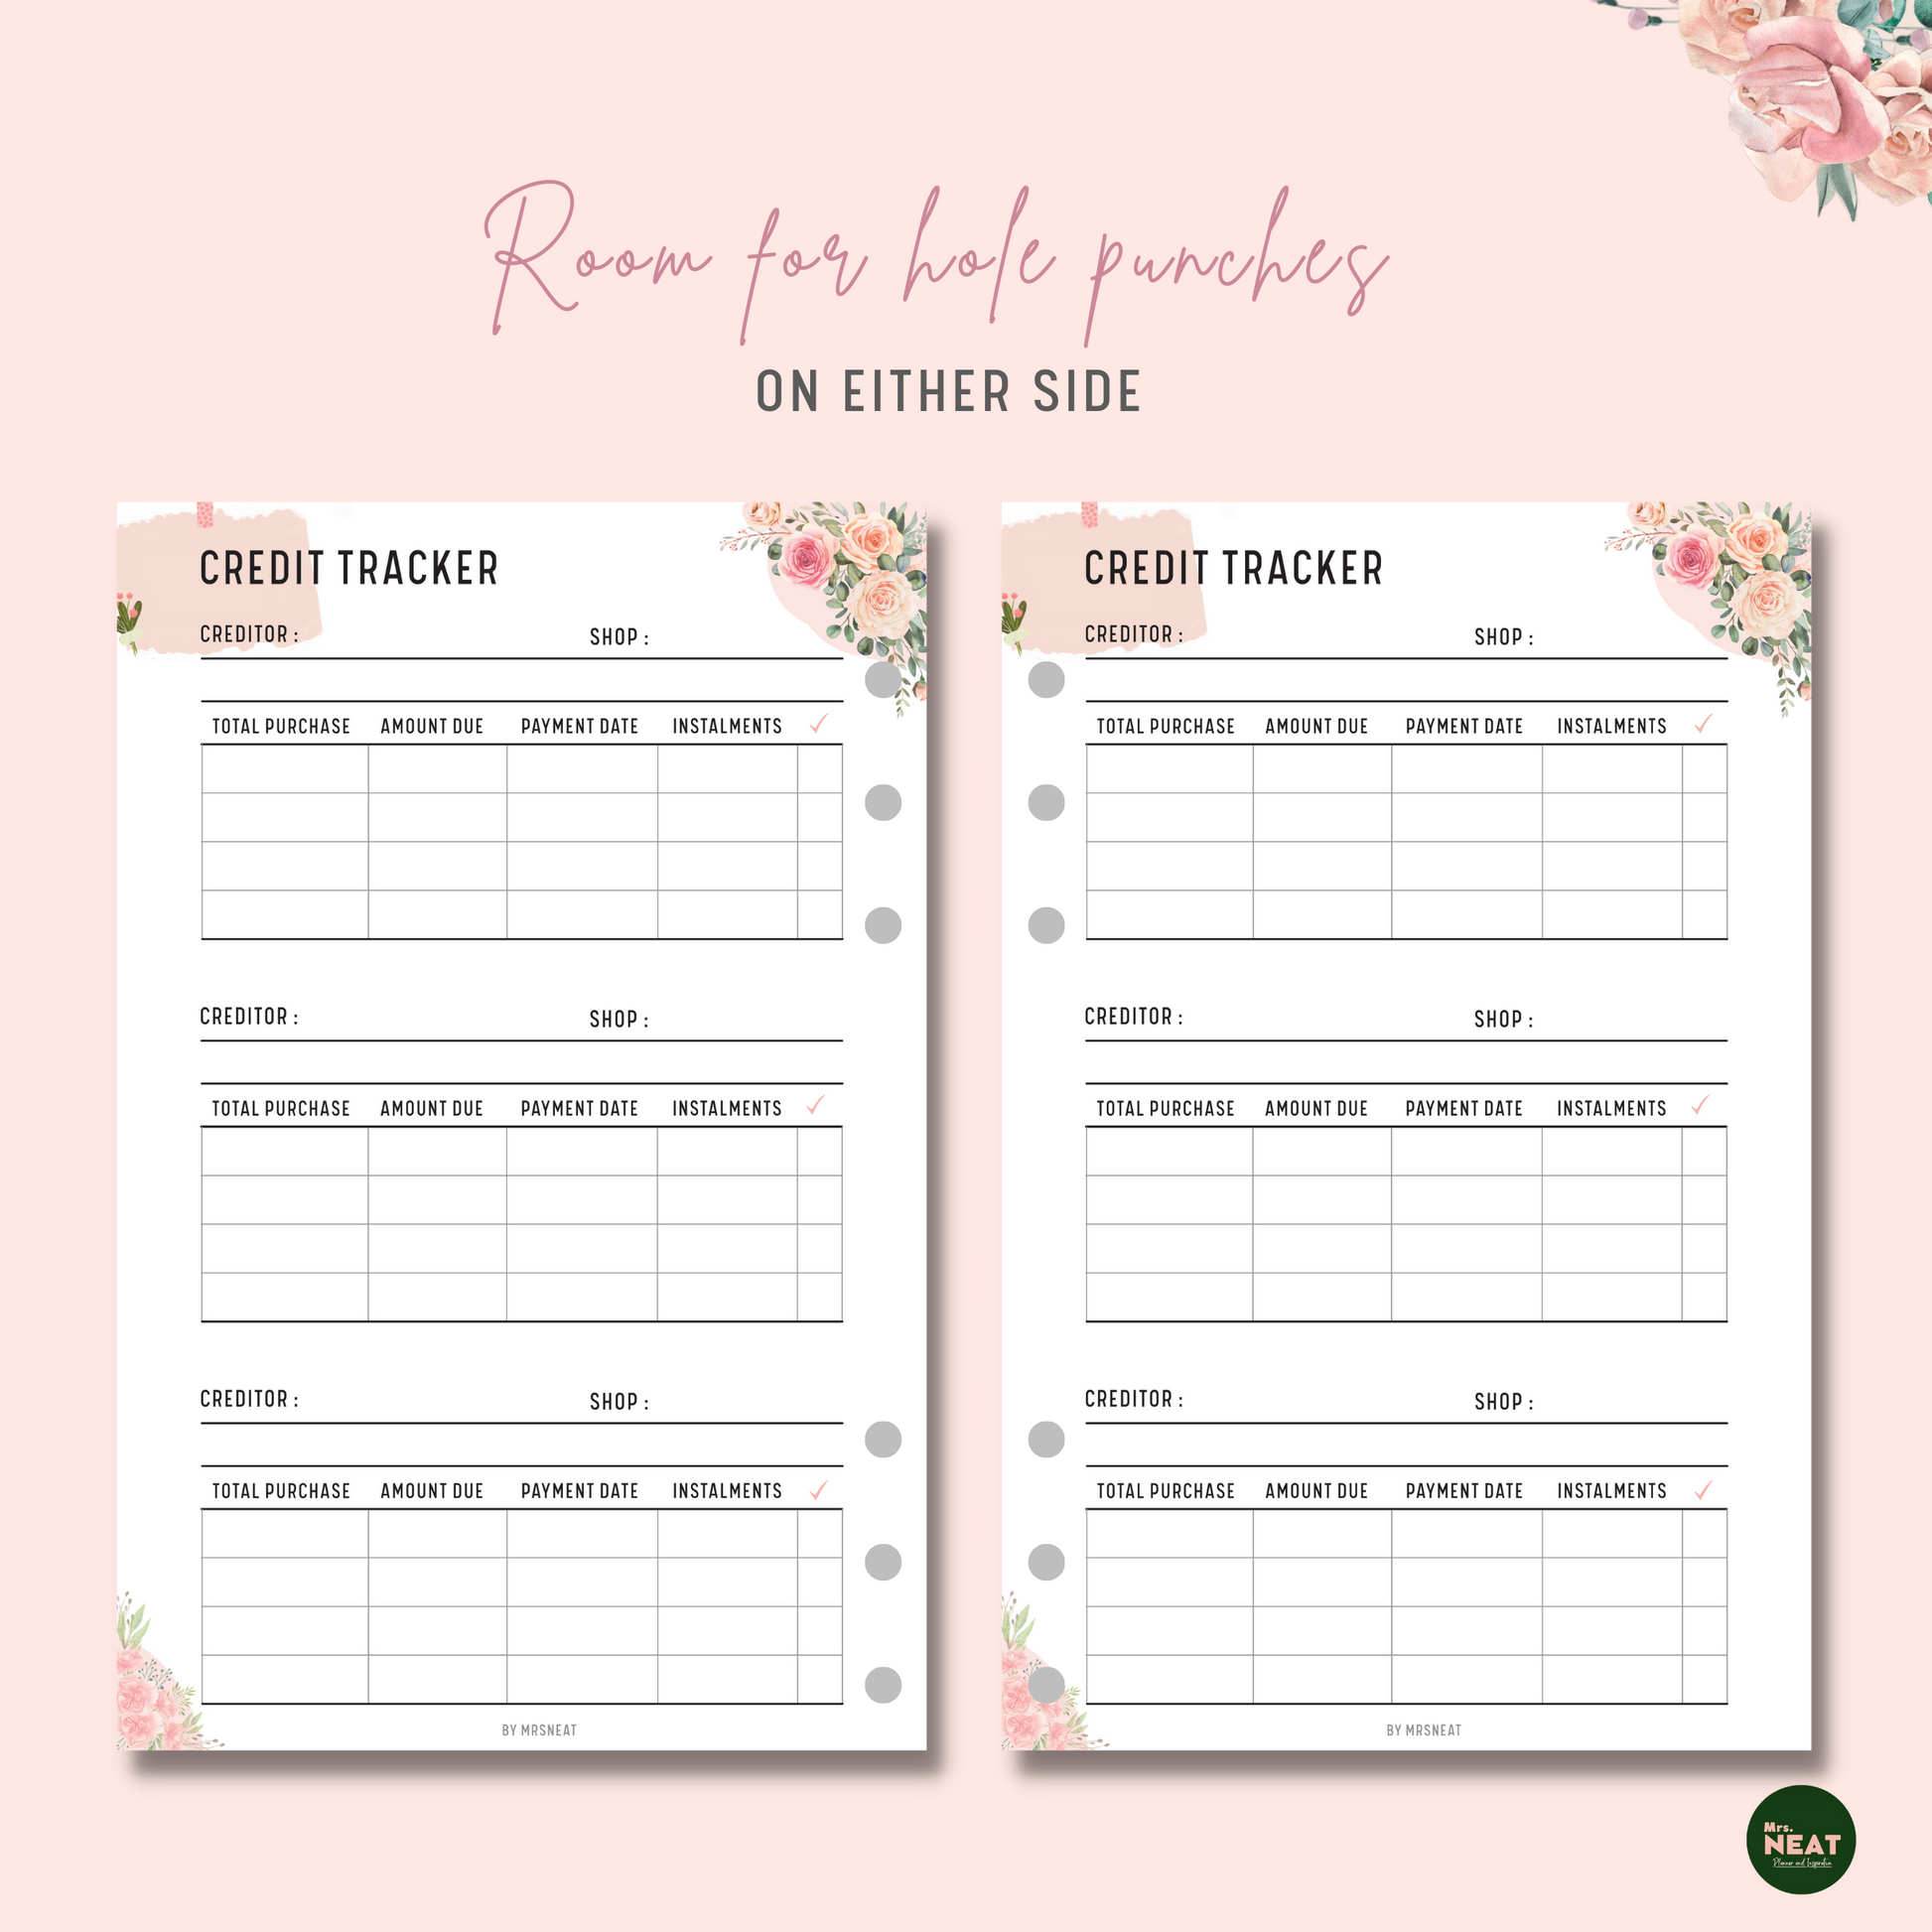 Cute and Minimalist Pink Floral Credit Tracker Planner with room for hole punches on either side